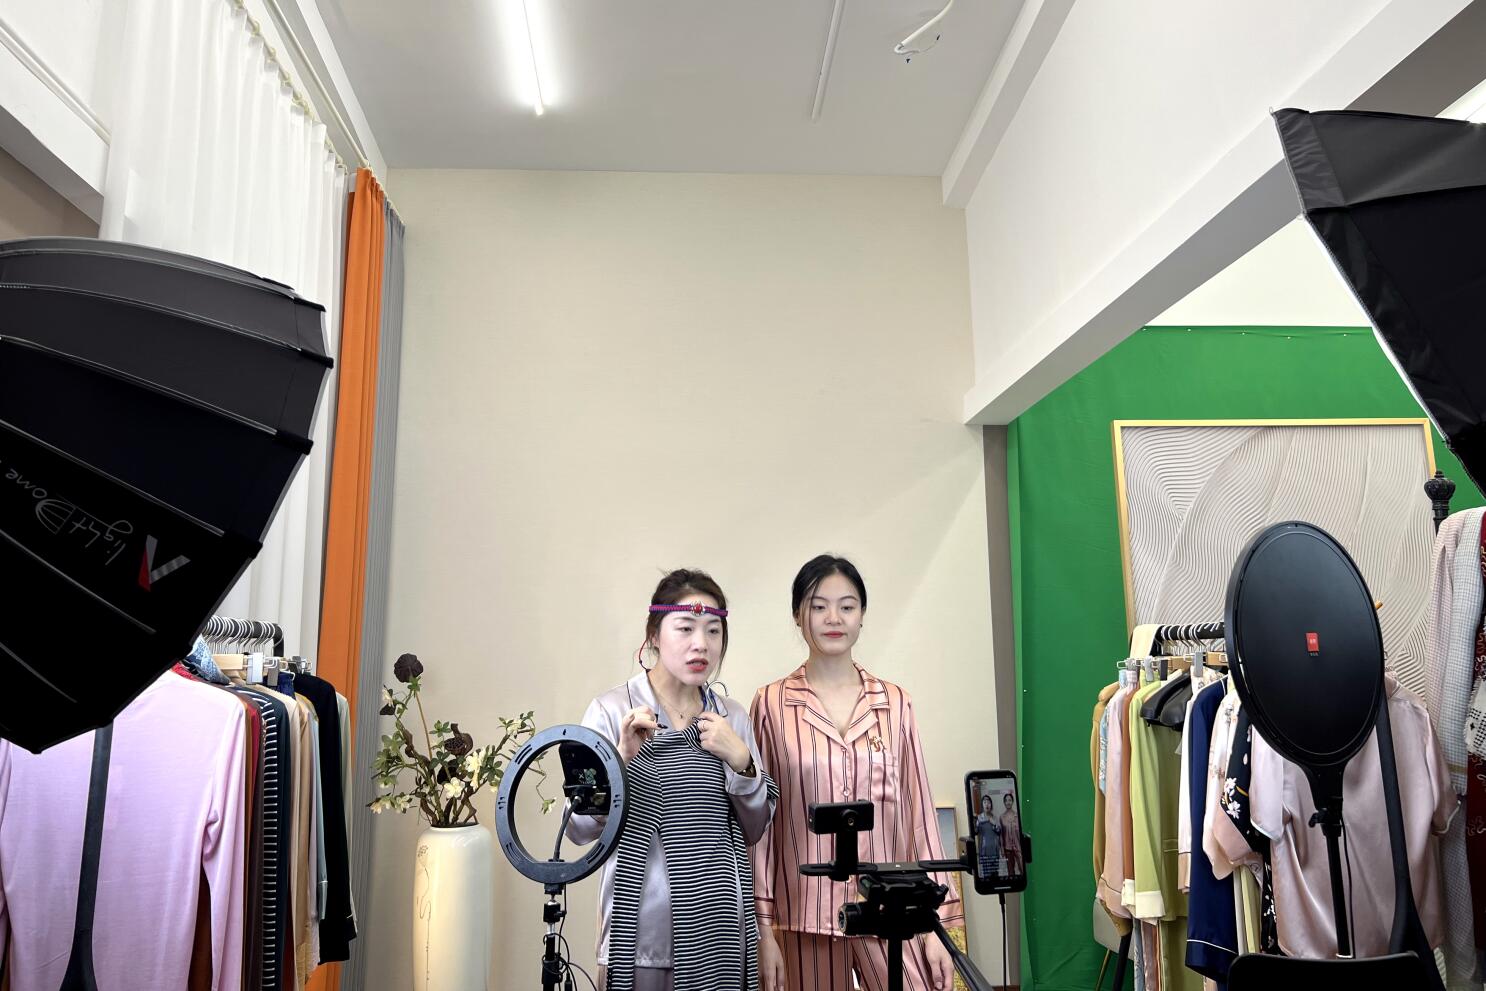 First came Shein. Can other Chinese brands replicate its success